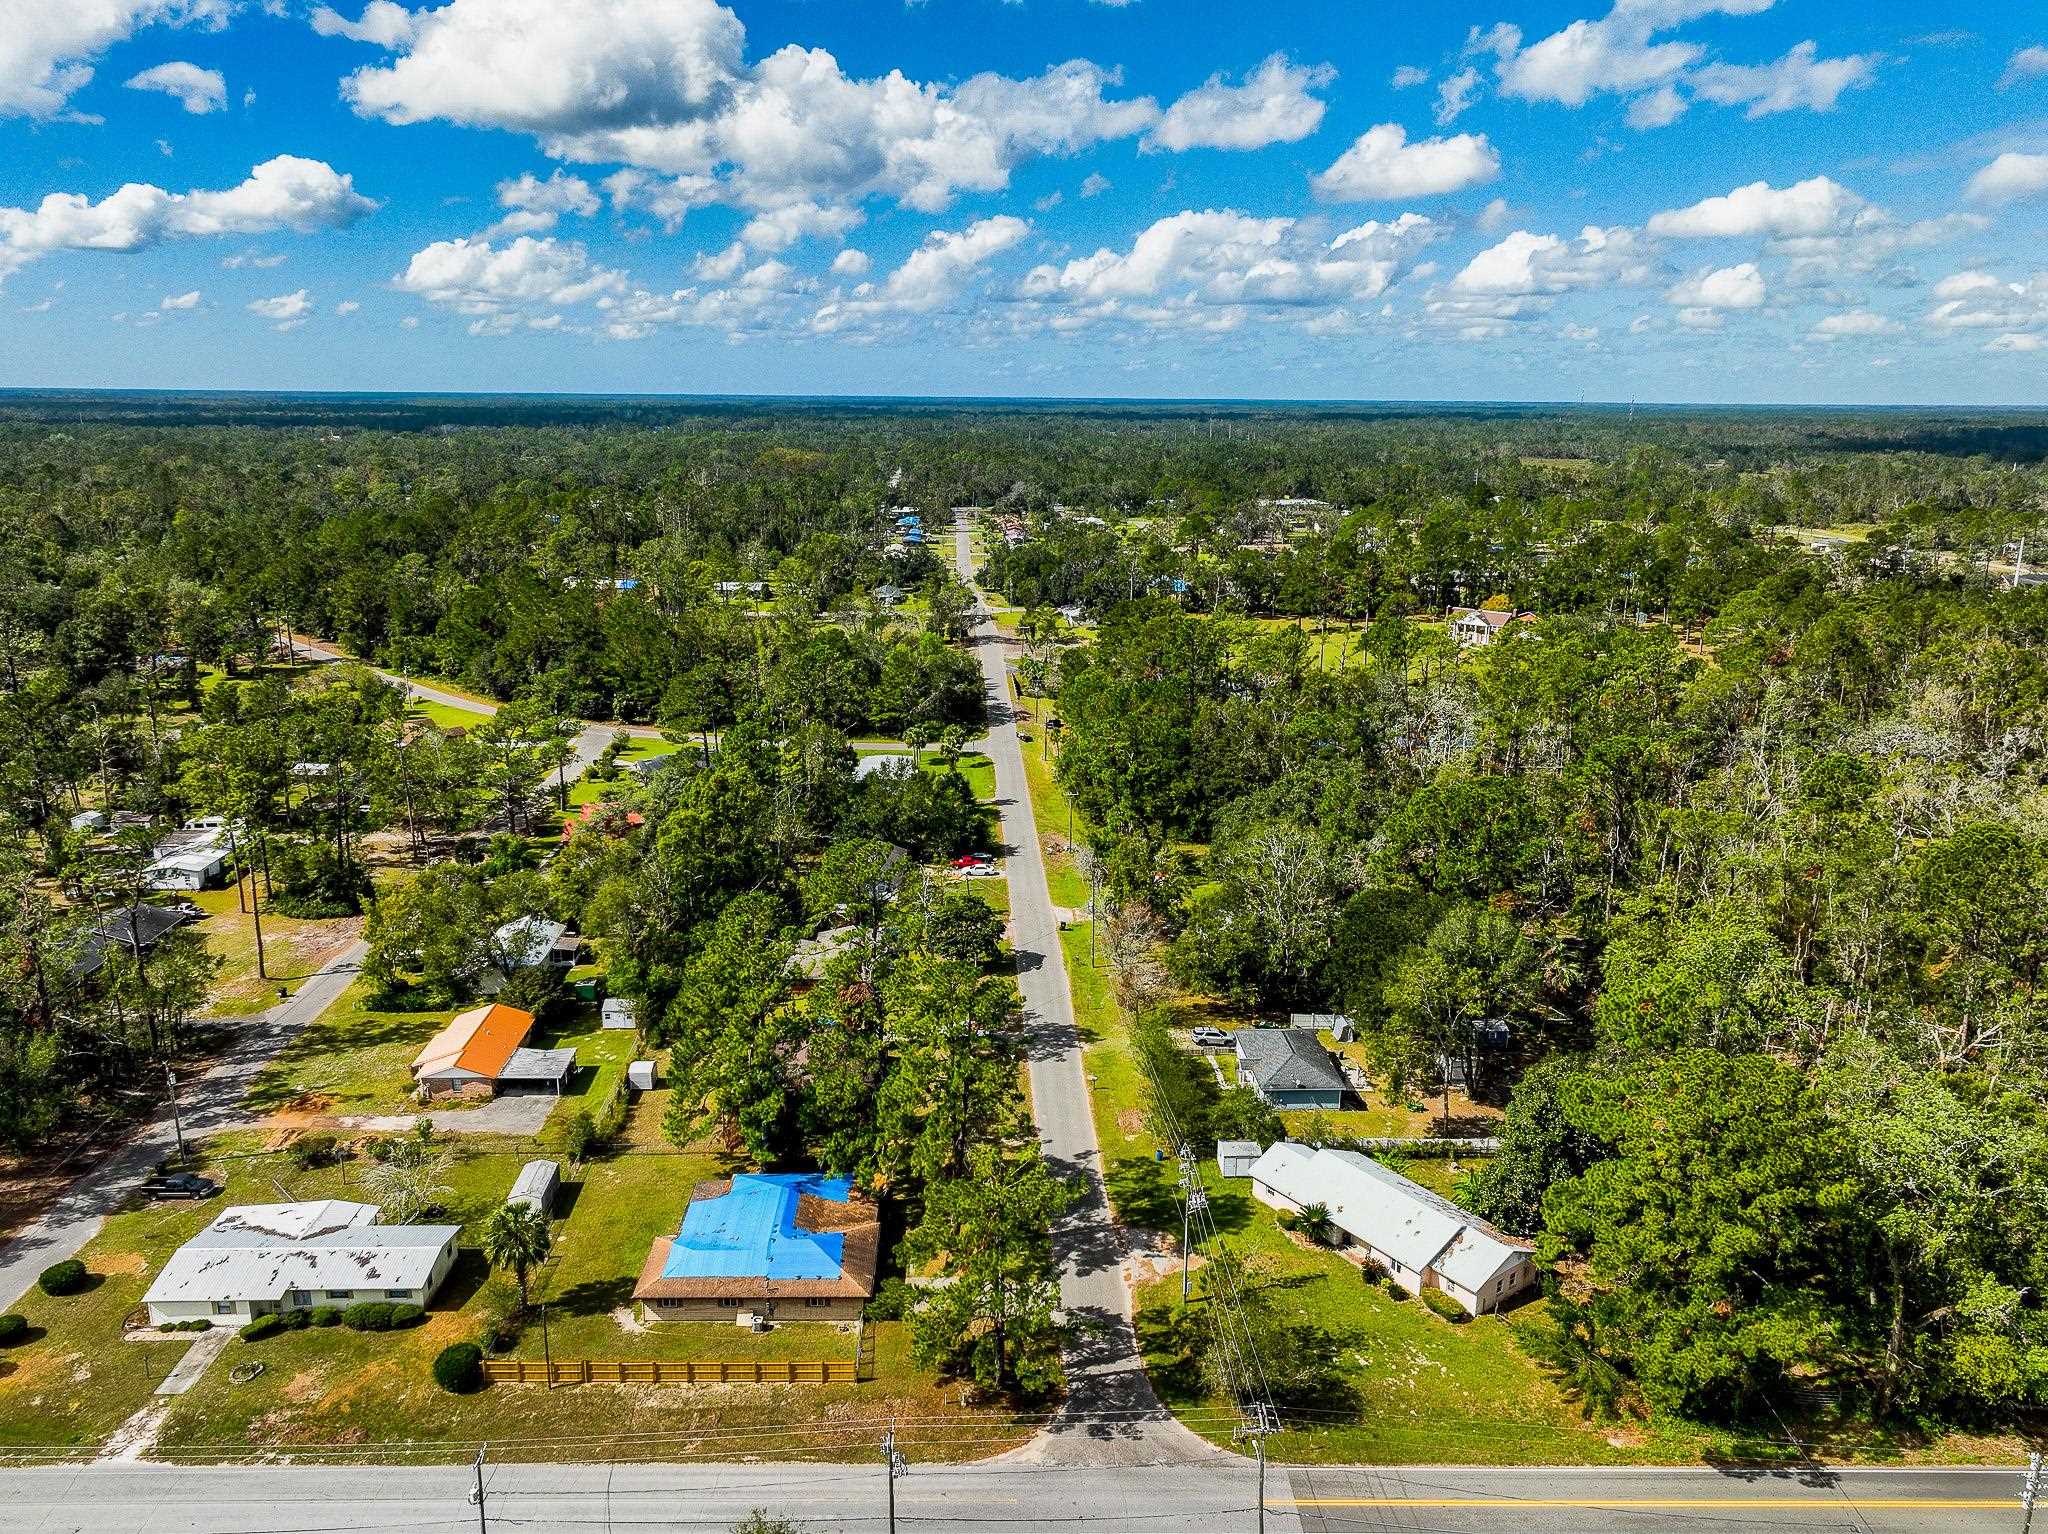 309 E Pace Drive,PERRY,Florida 32347,3 Bedrooms Bedrooms,2 BathroomsBathrooms,Detached single family,309 E Pace Drive,365038